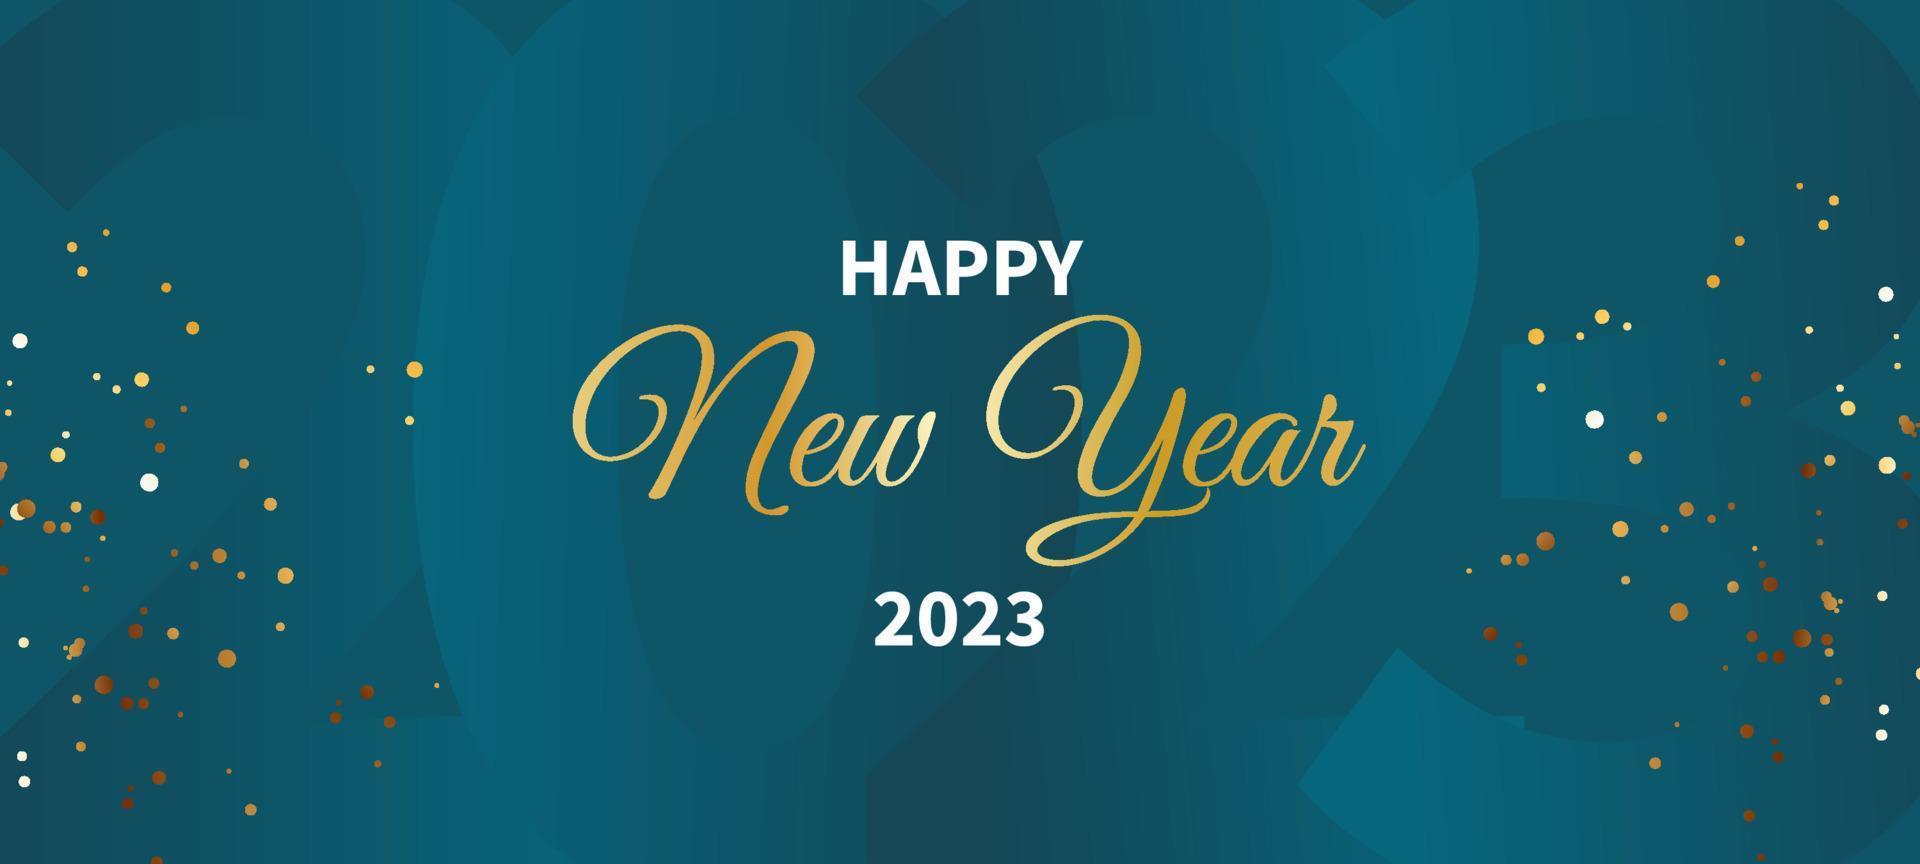 Happy New Year 2023 banner with gold confetti vector